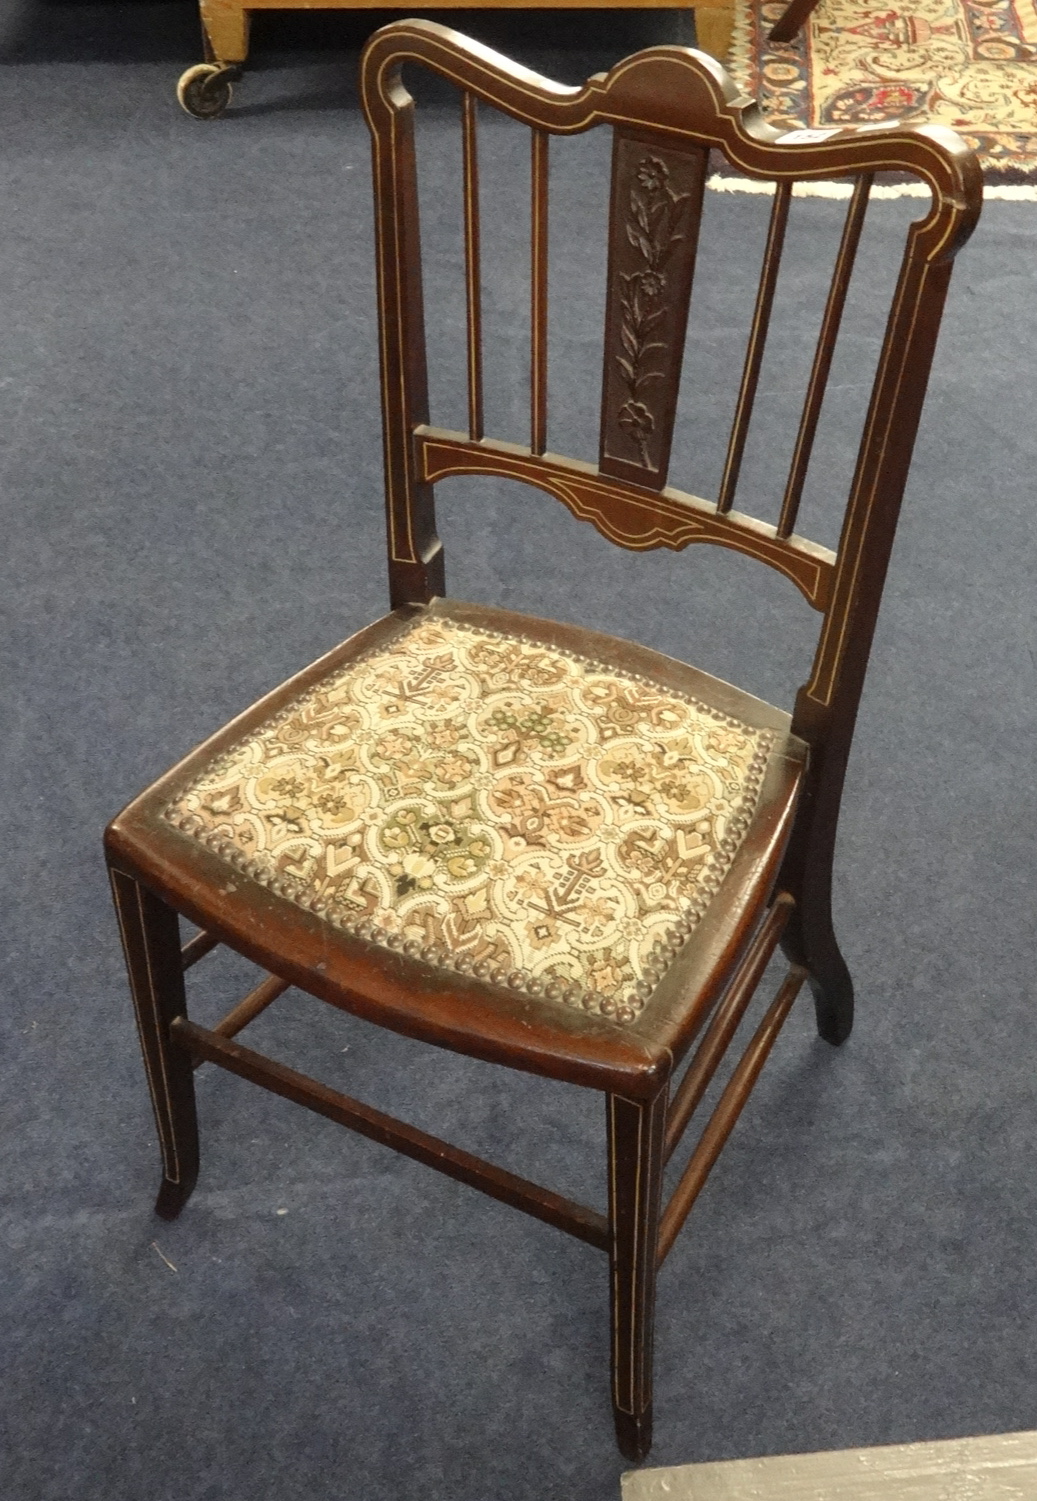 An Edwardian bedroom chair with inlaid decoration.